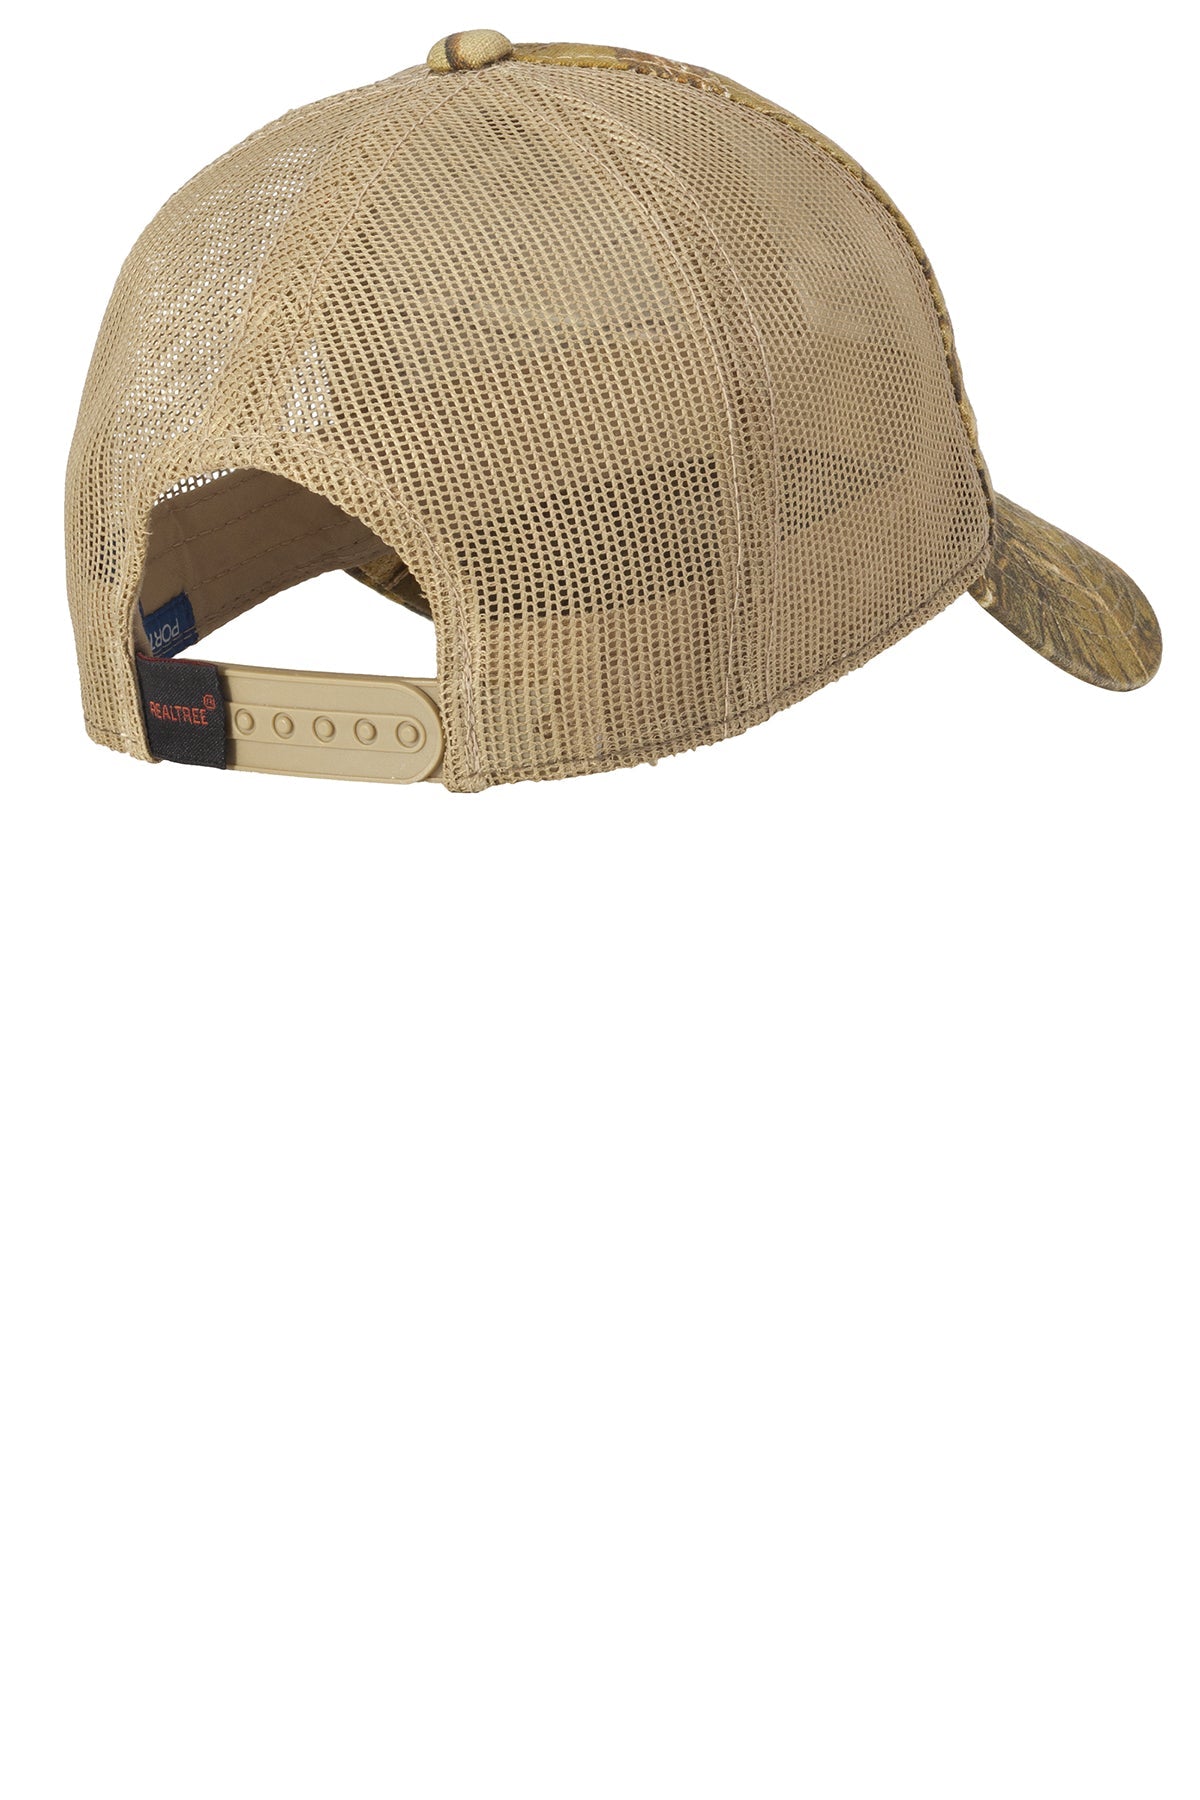 Port Authority Unstructured Camouflage Mesh Back Branded Caps, Realtree Xtra/ Tan